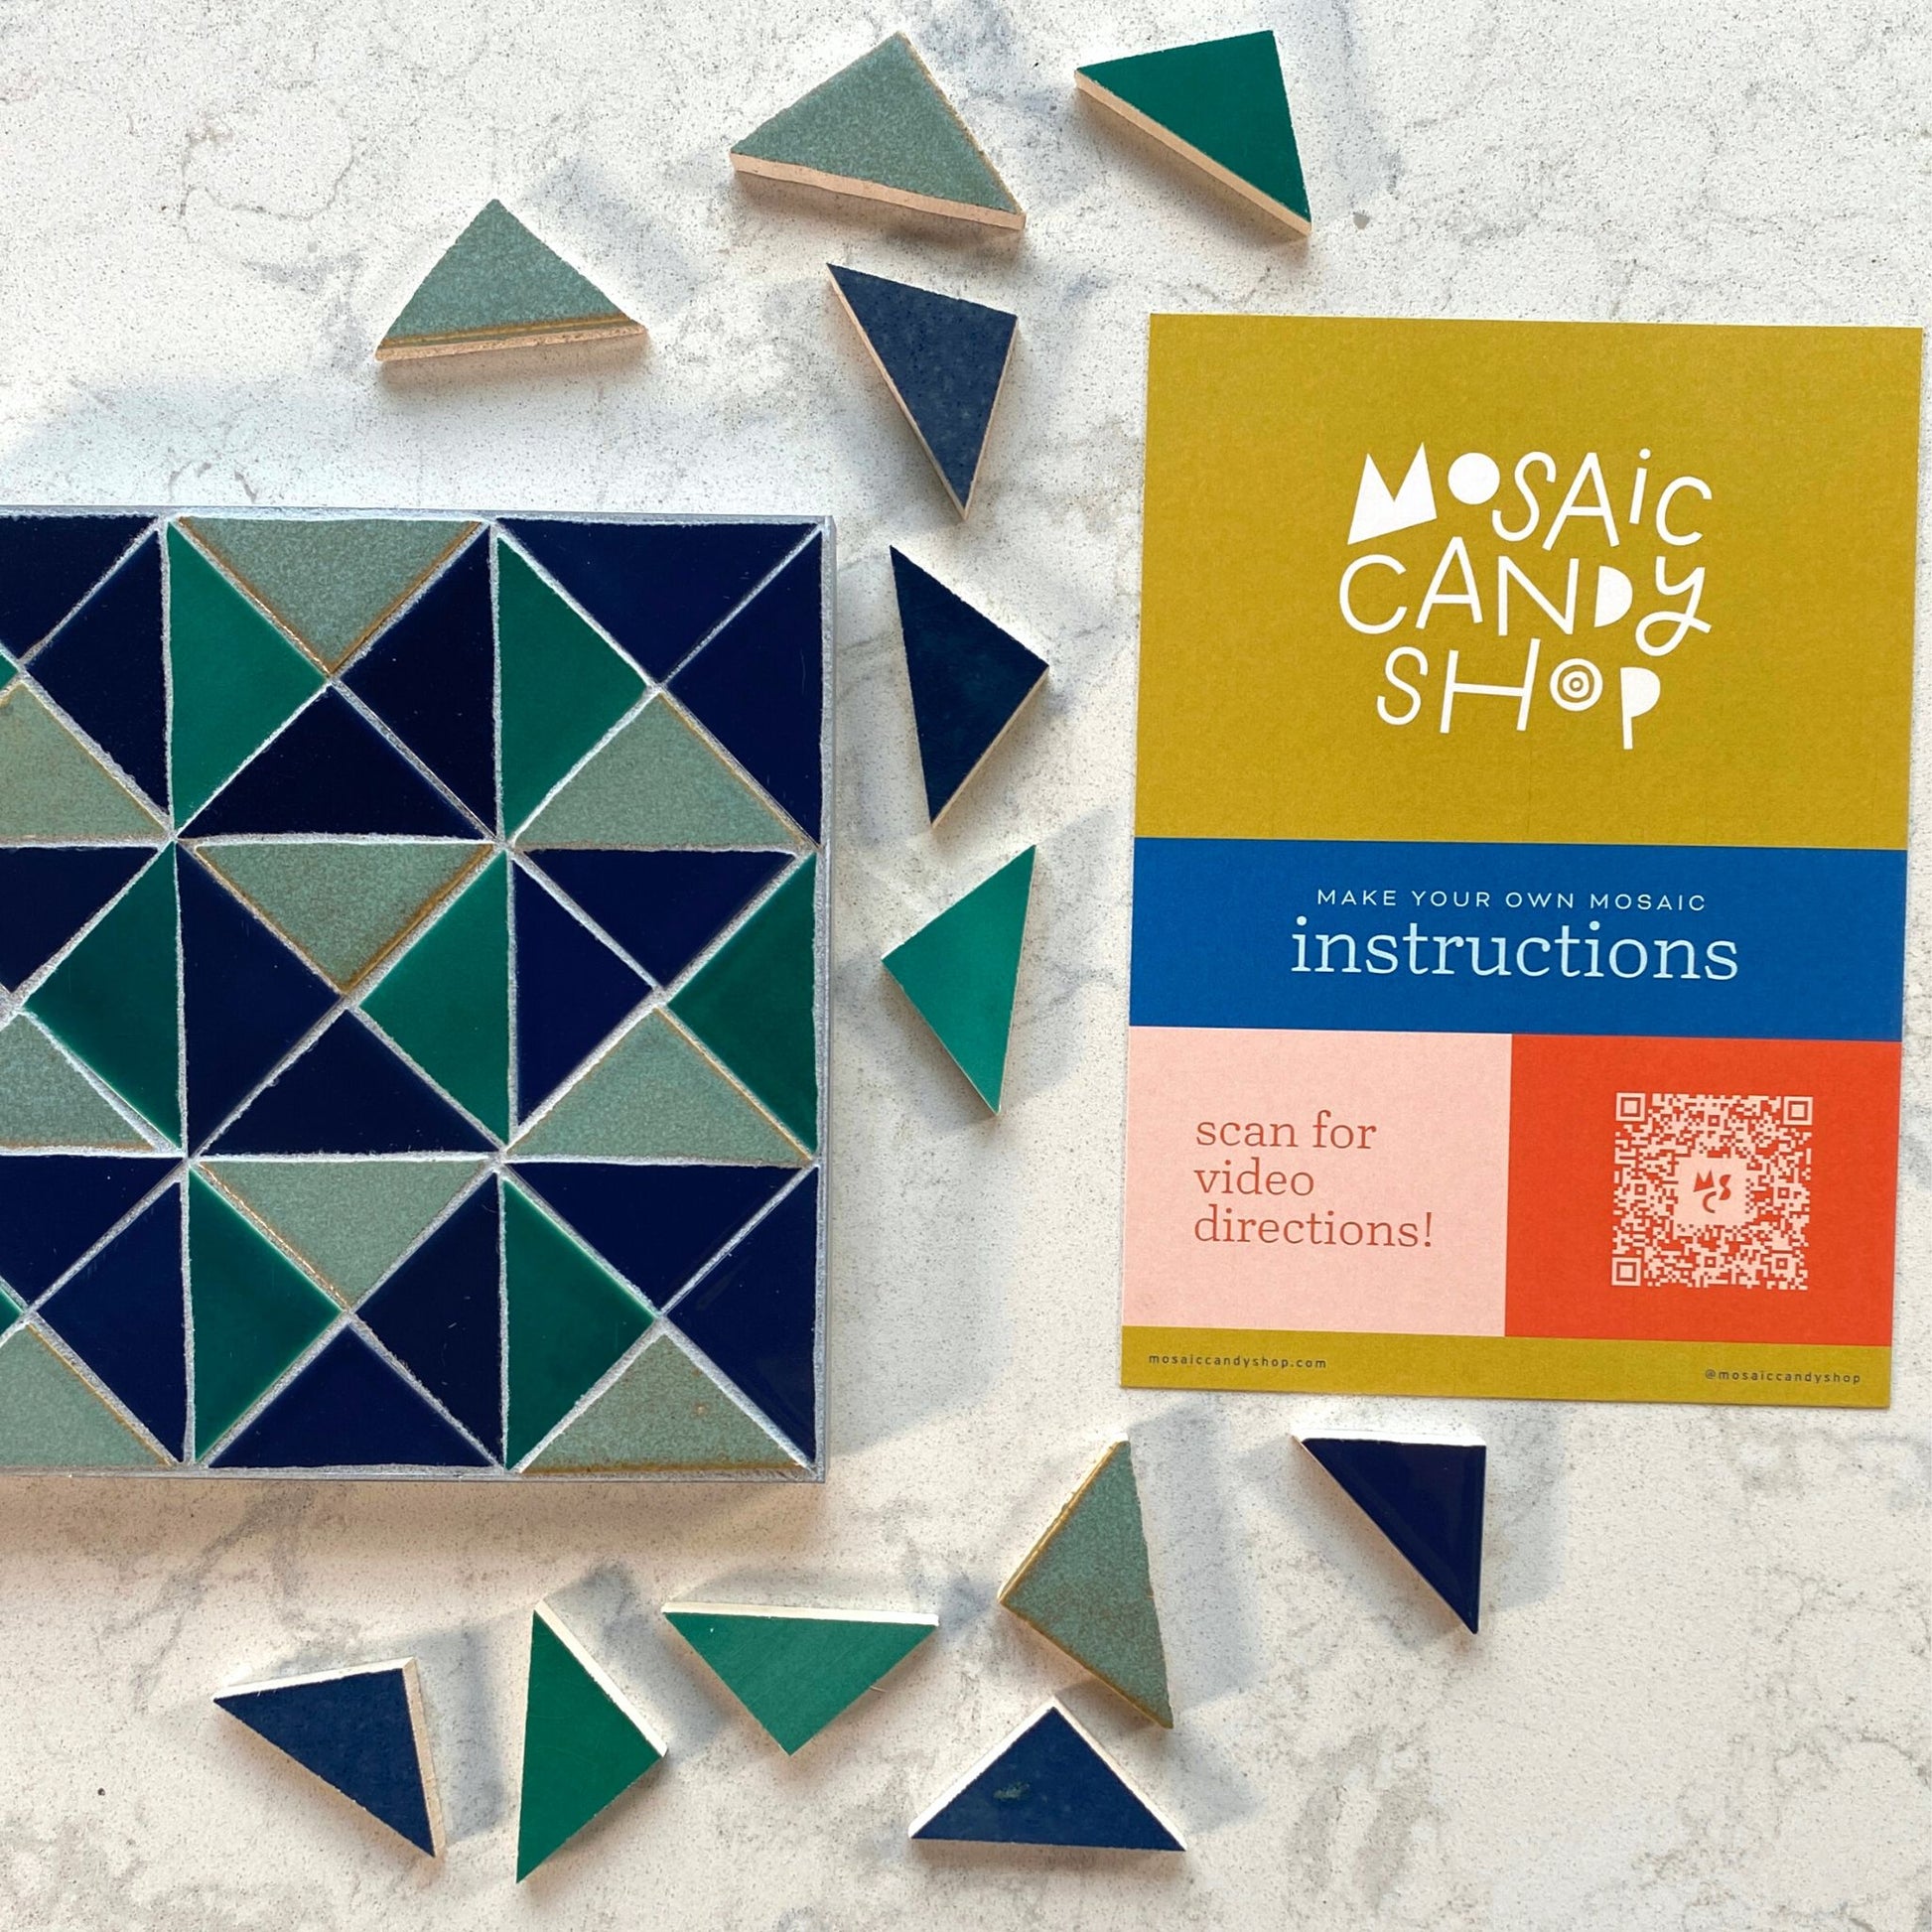 Quilt Mosaic Kit in Heritage Mint with QR Video Instruction Card